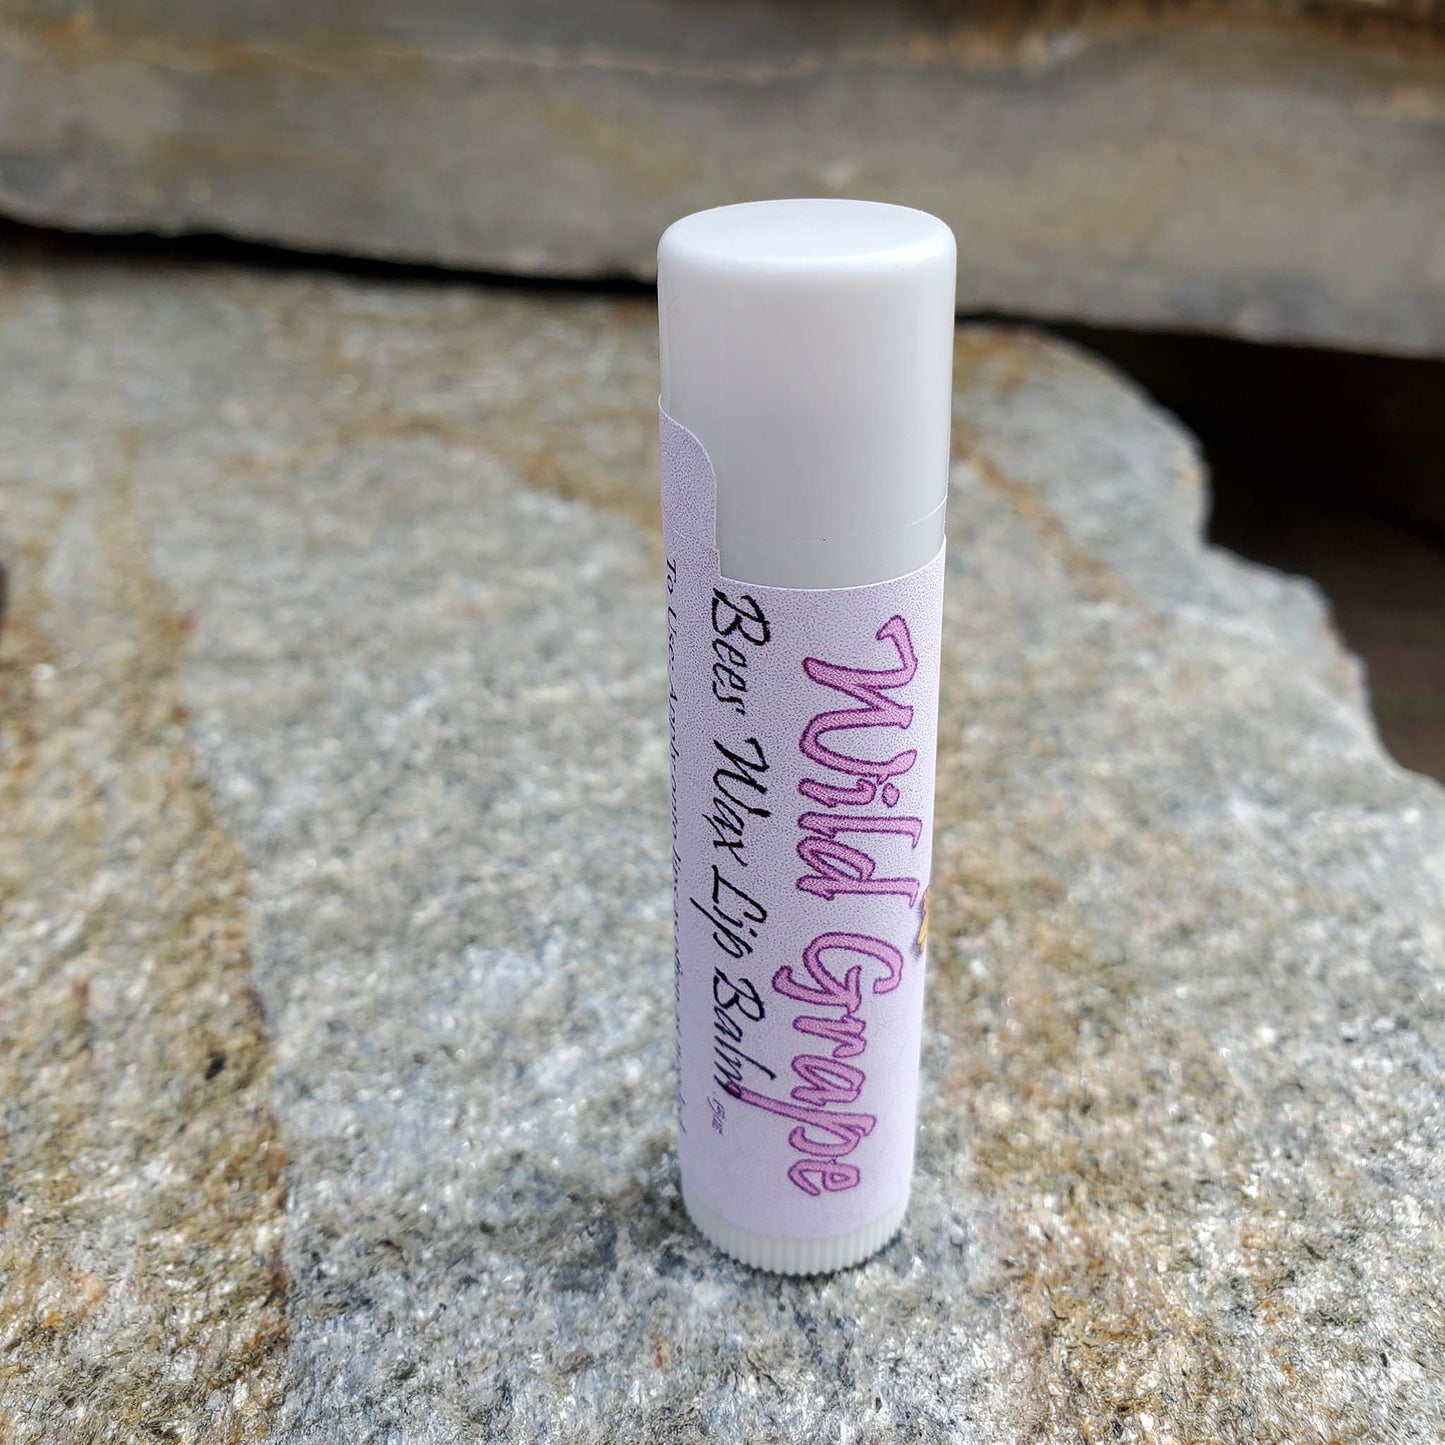 Wild Grape Bees Wax Lip Balm From Bee Your Own Valentine